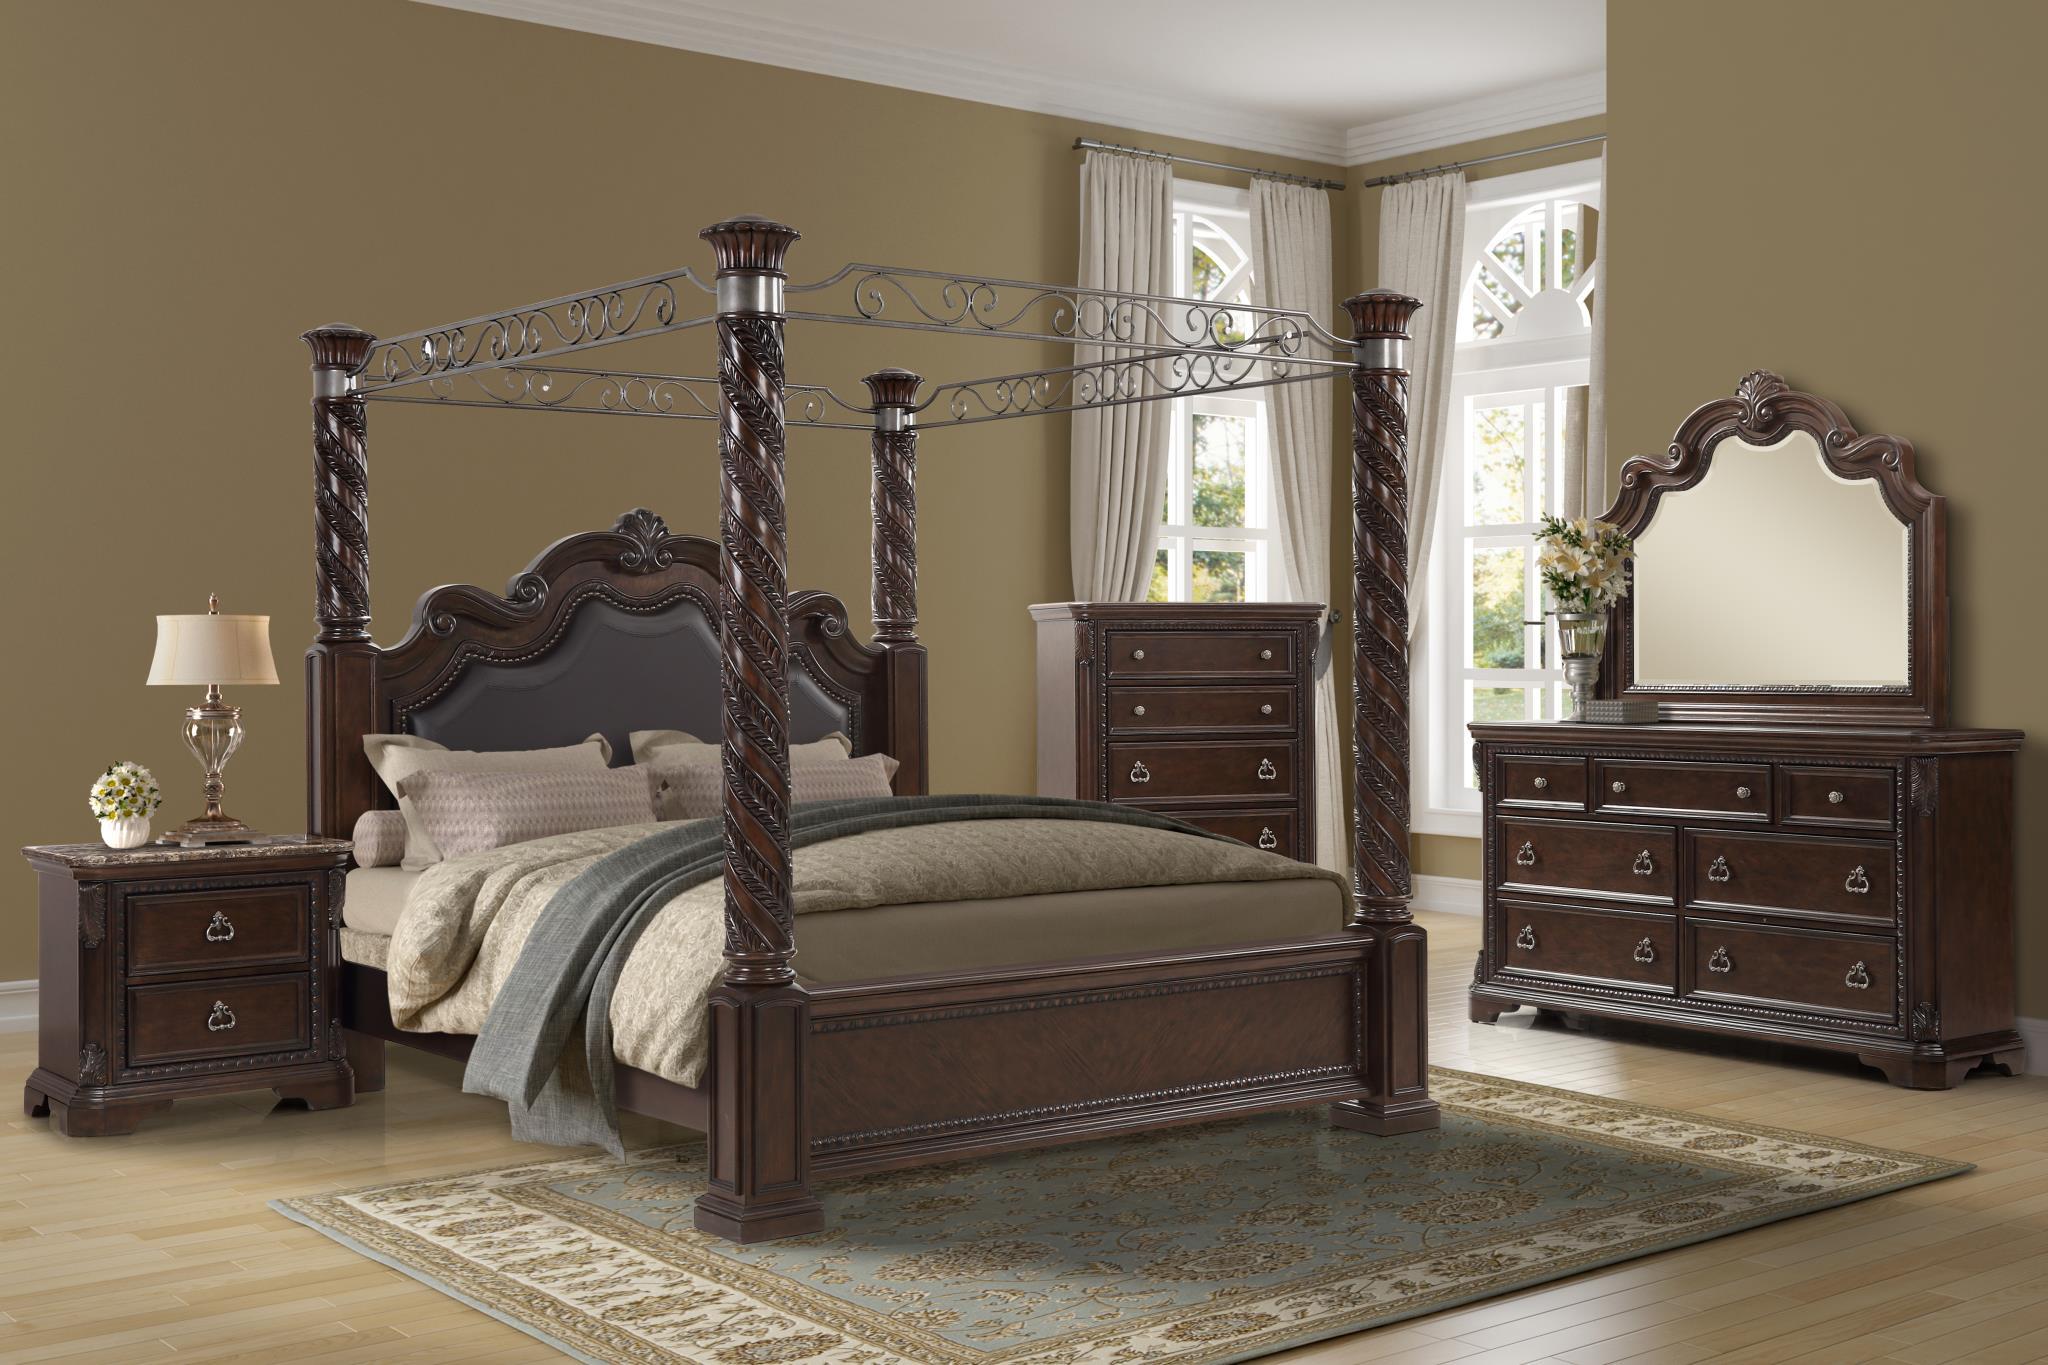 Modern, Transitional Bedroom Set Coventry 1988-108-3pcs in Mahogany Bonded Leather